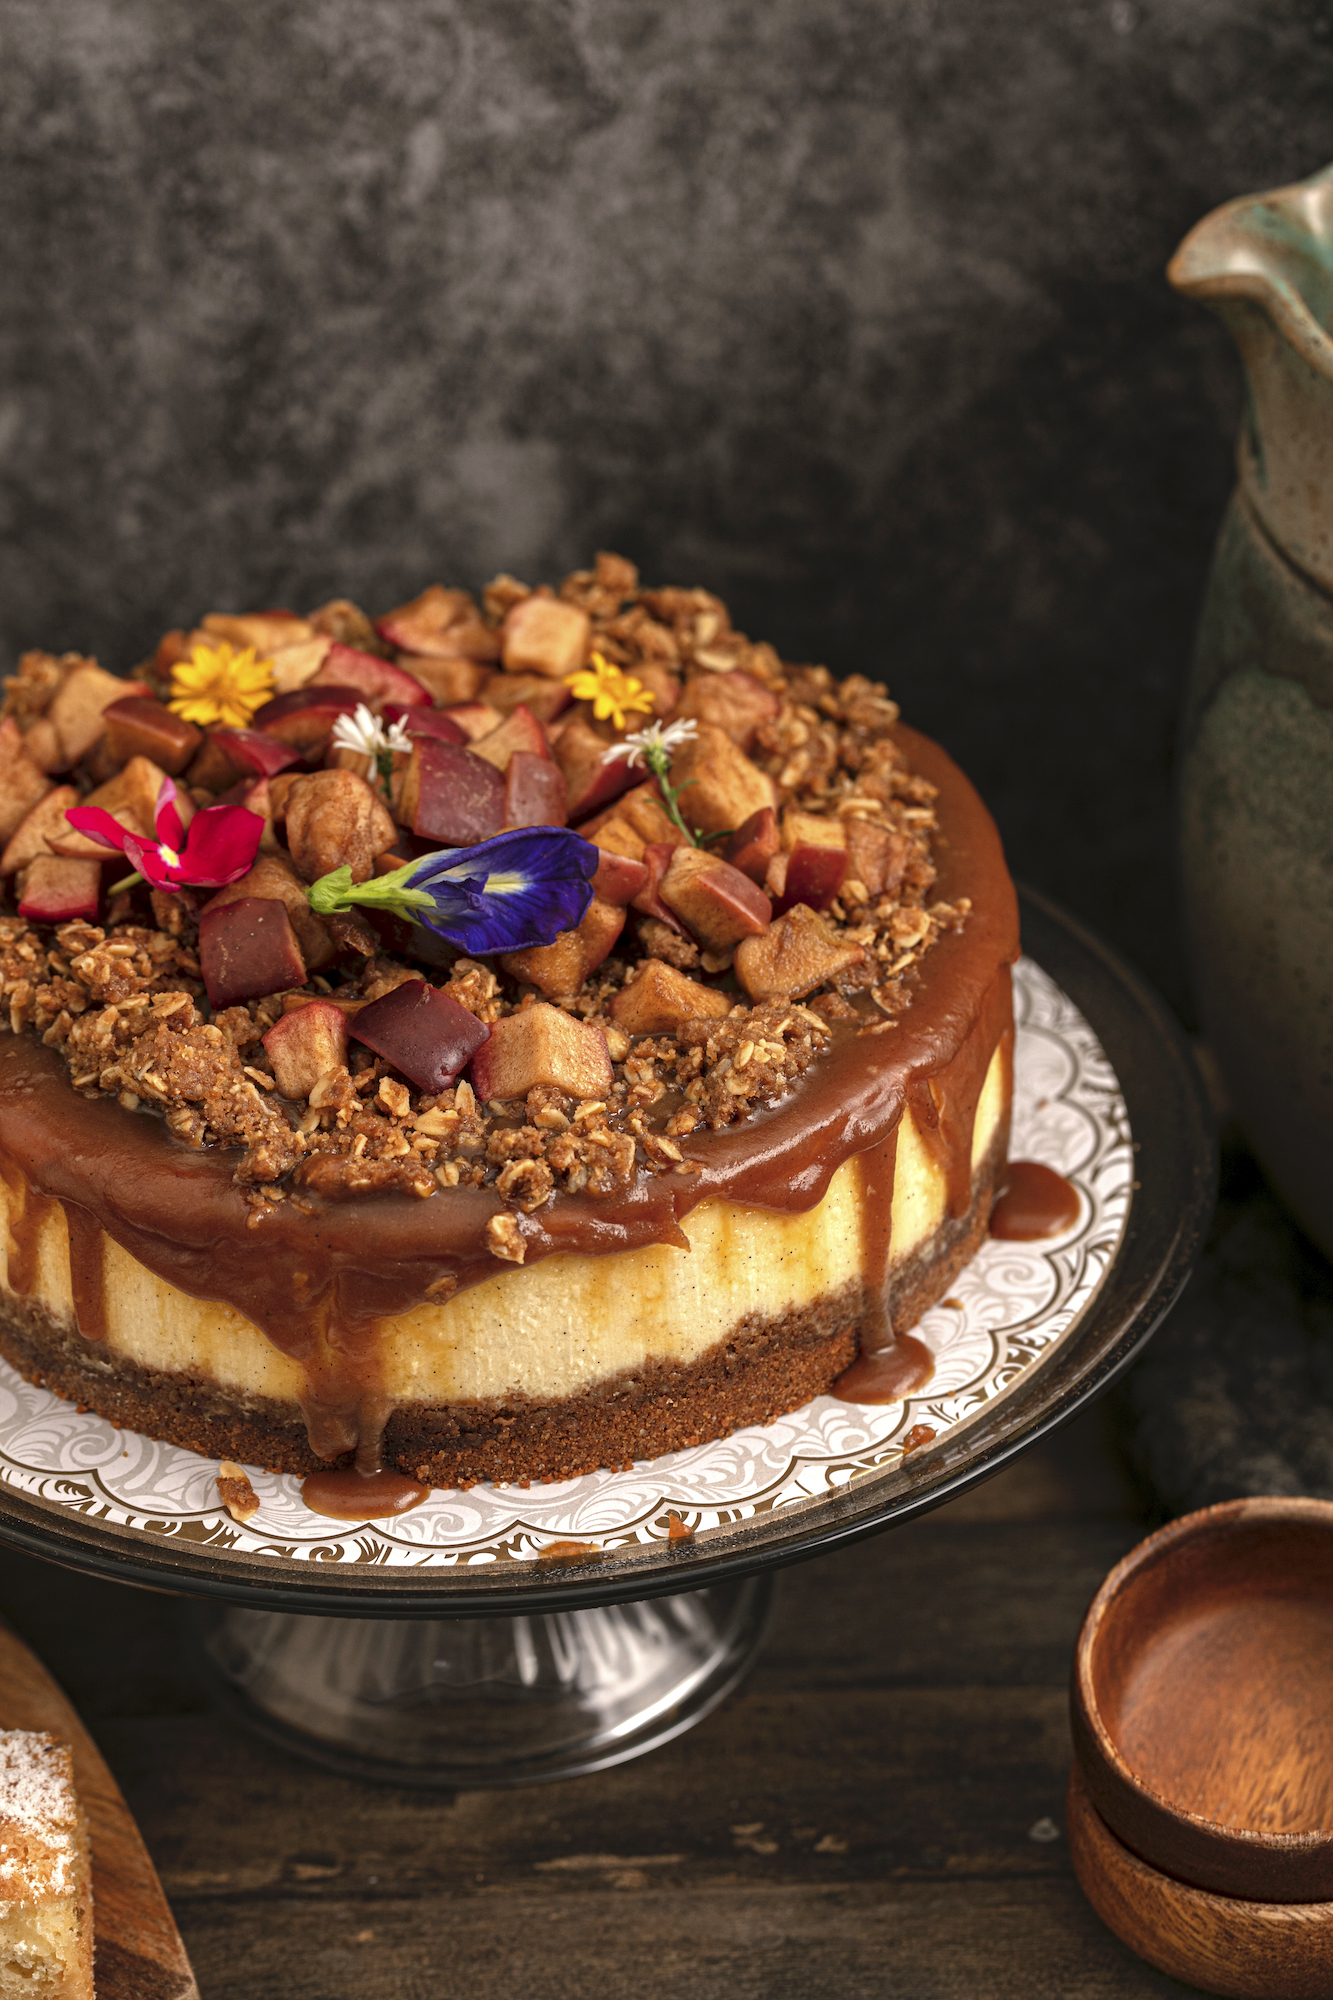 One of the seasonal cakes of Butternut Bakery: Mr. Vanilla Bean Cheesecake with Salted Caramel Apple Crumble